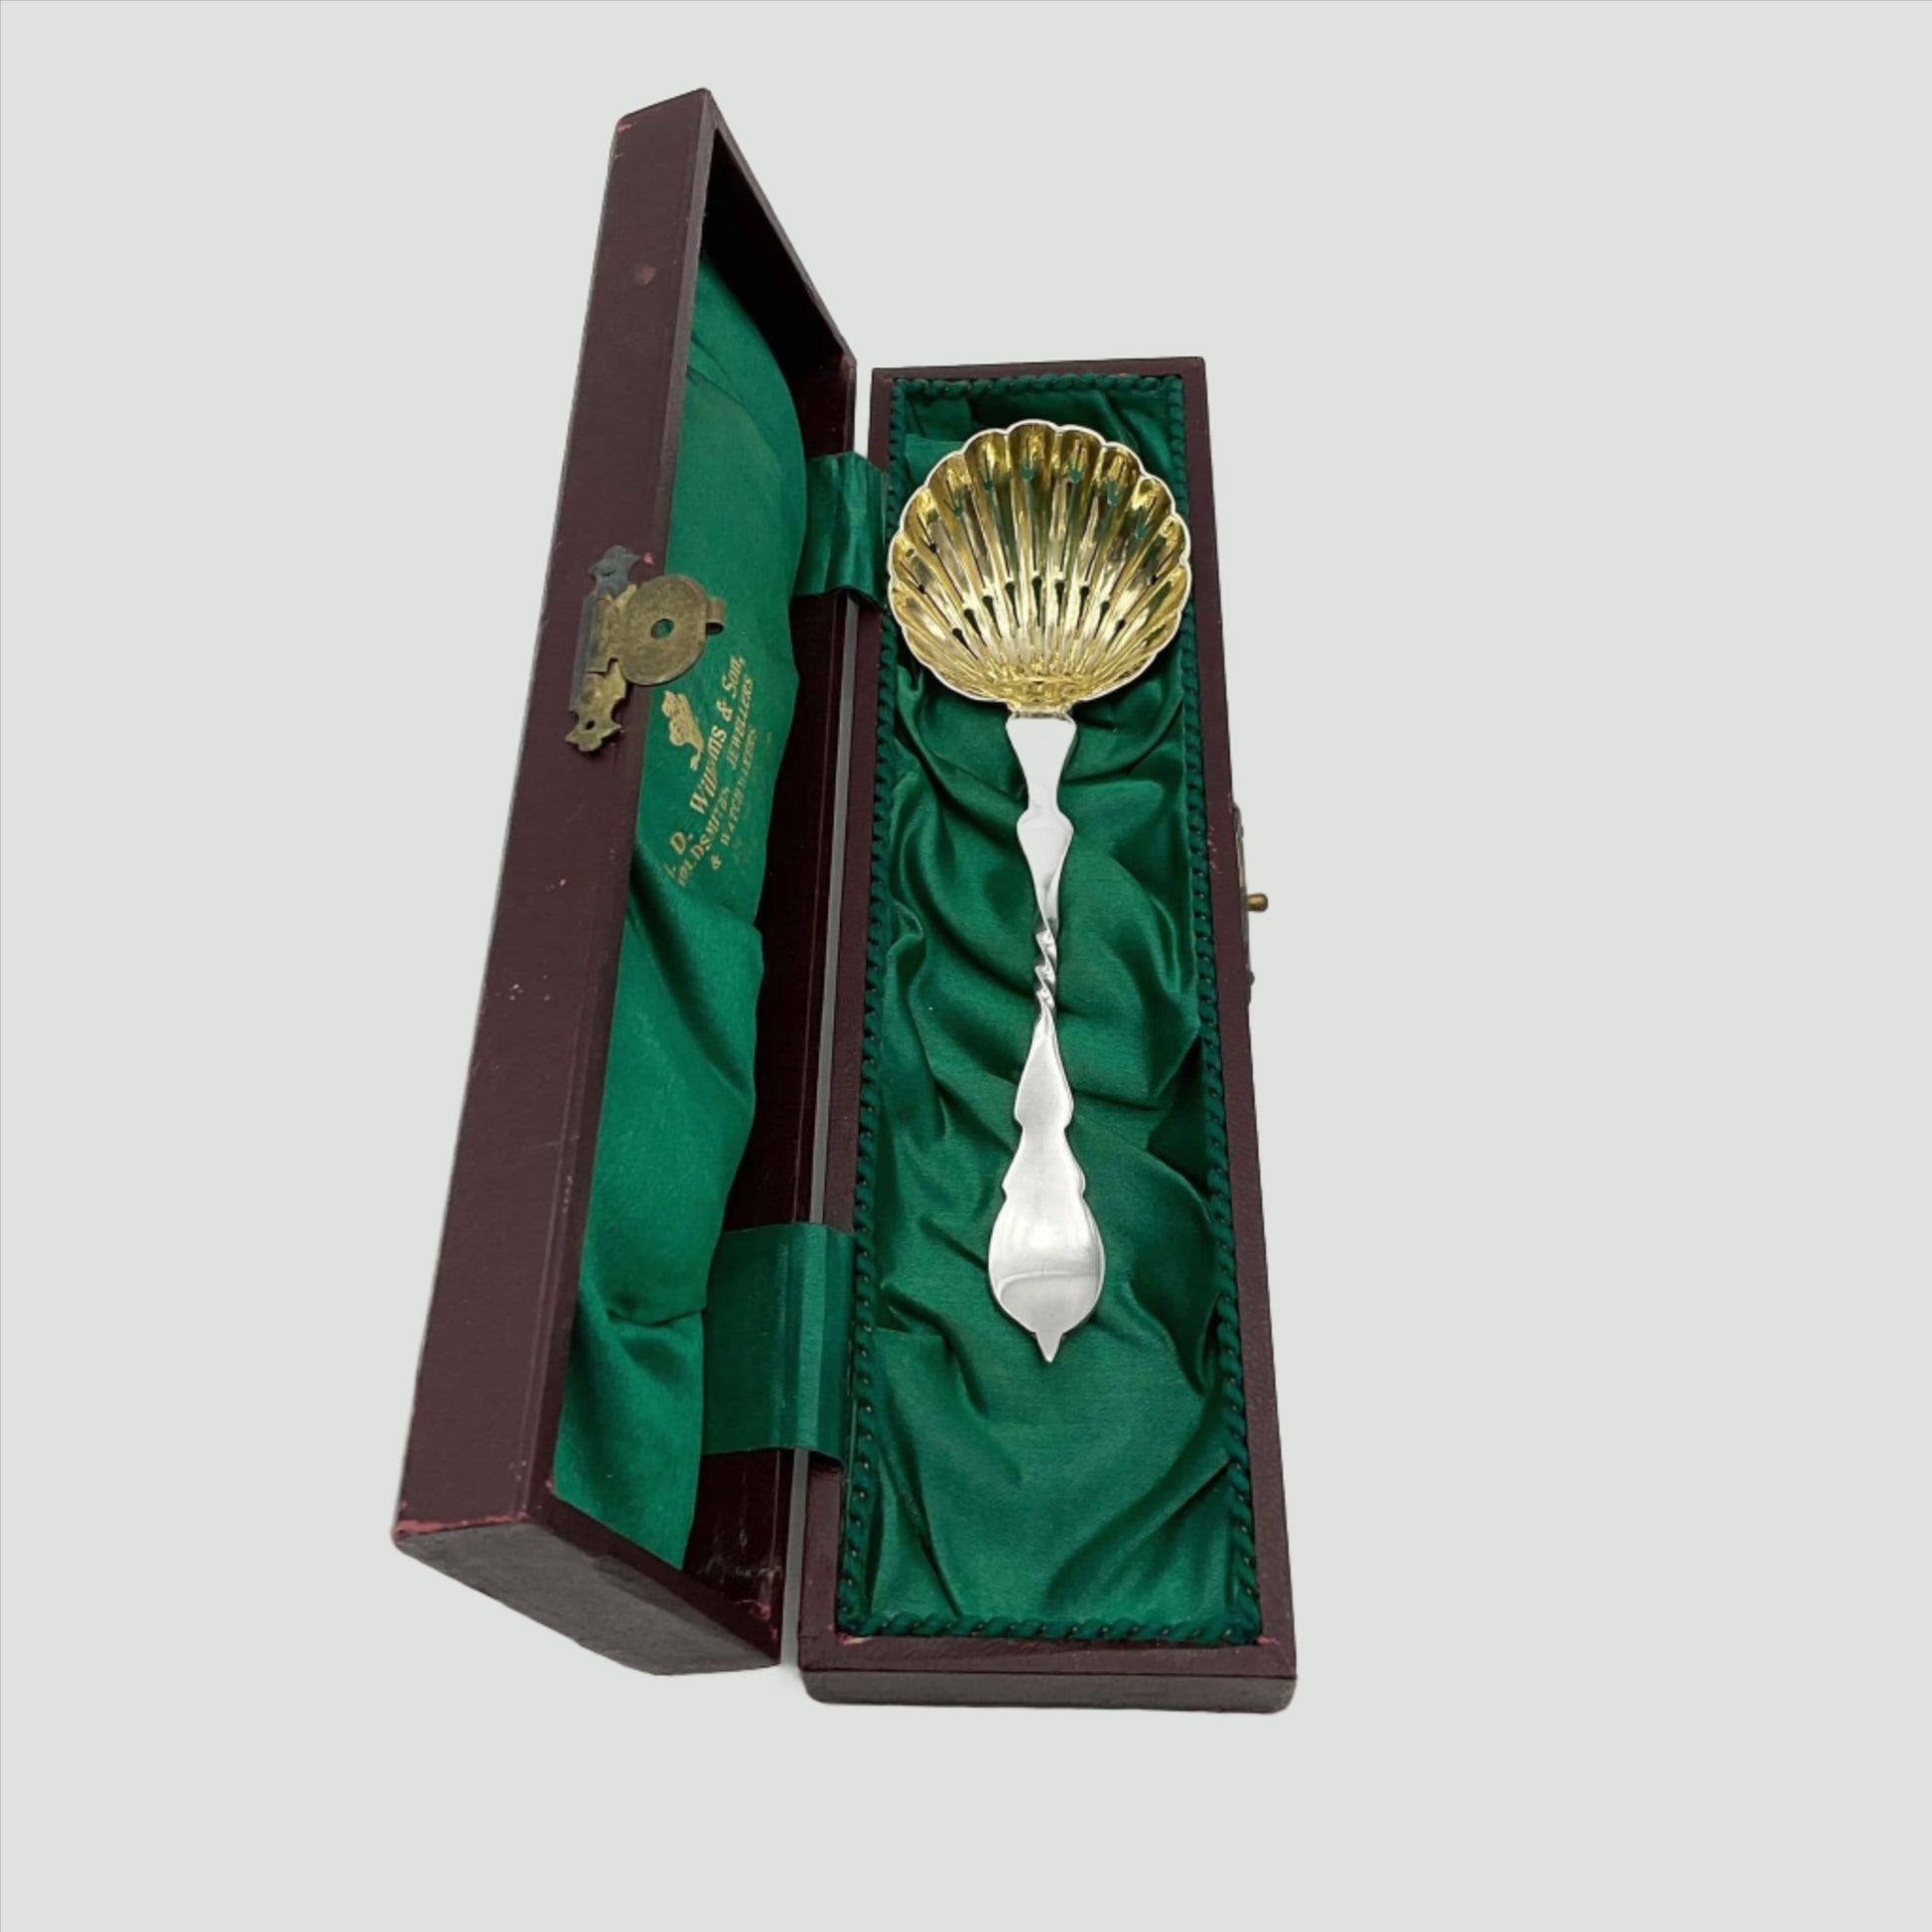 Beautiful gilded Silver sugar sifter spoon in a green lined presentation box